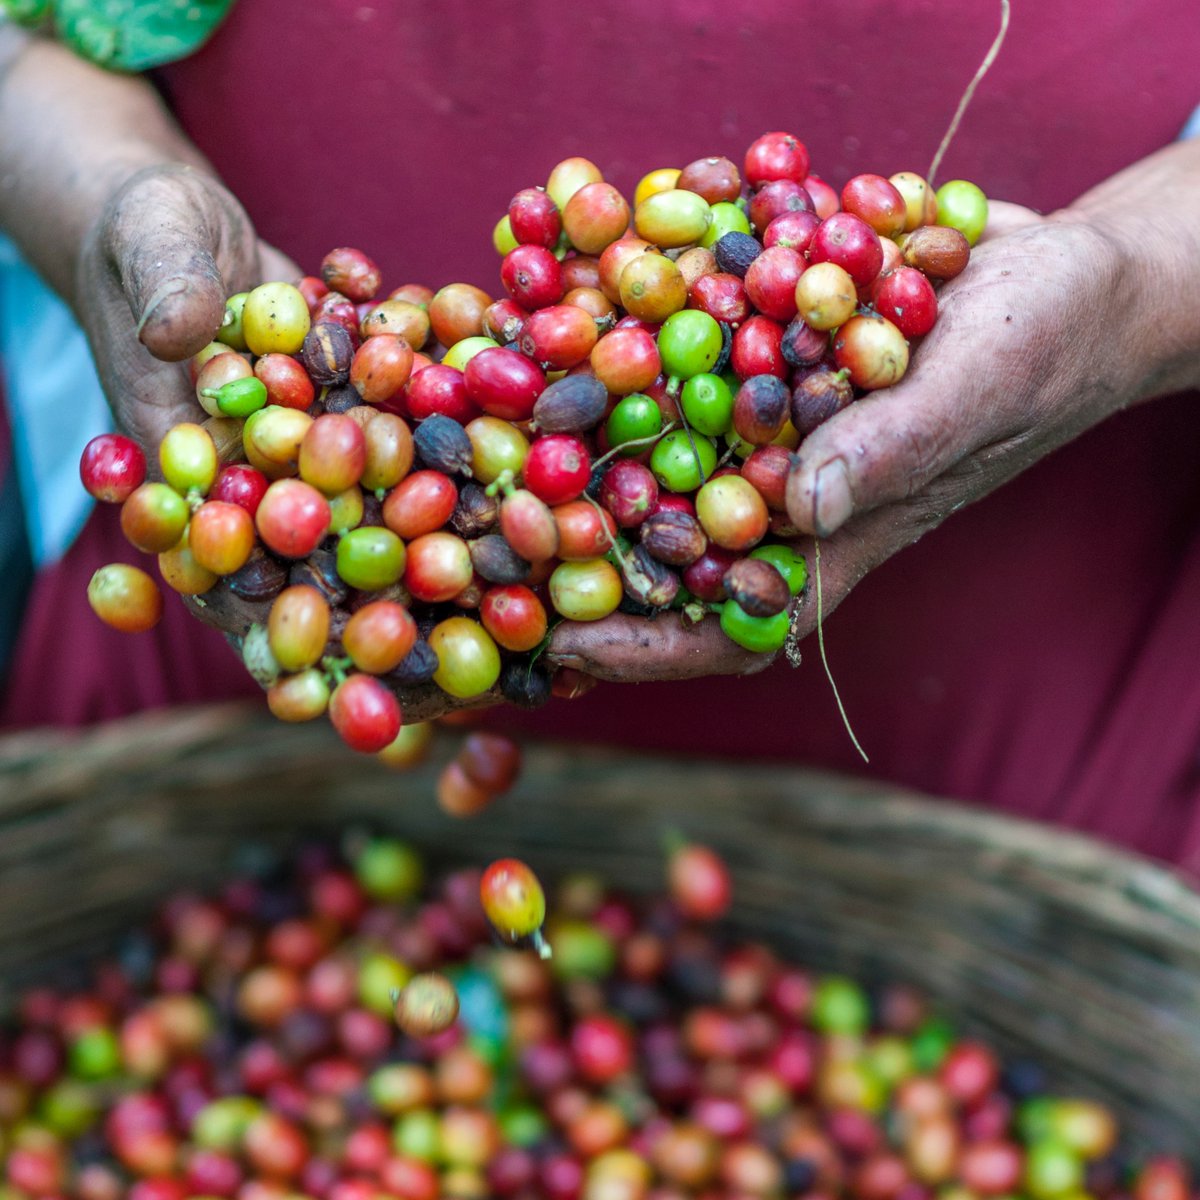 ☕️ Fun fact: Coffee beans are not actually beans, but seeds! They are found inside the fruit of the coffee plant, known as coffee cherries. Each cherry typically contains two seeds, which are processed and roasted.🌱✨ #CoffeeFacts #SeedNotBean #BigBrainCoffee